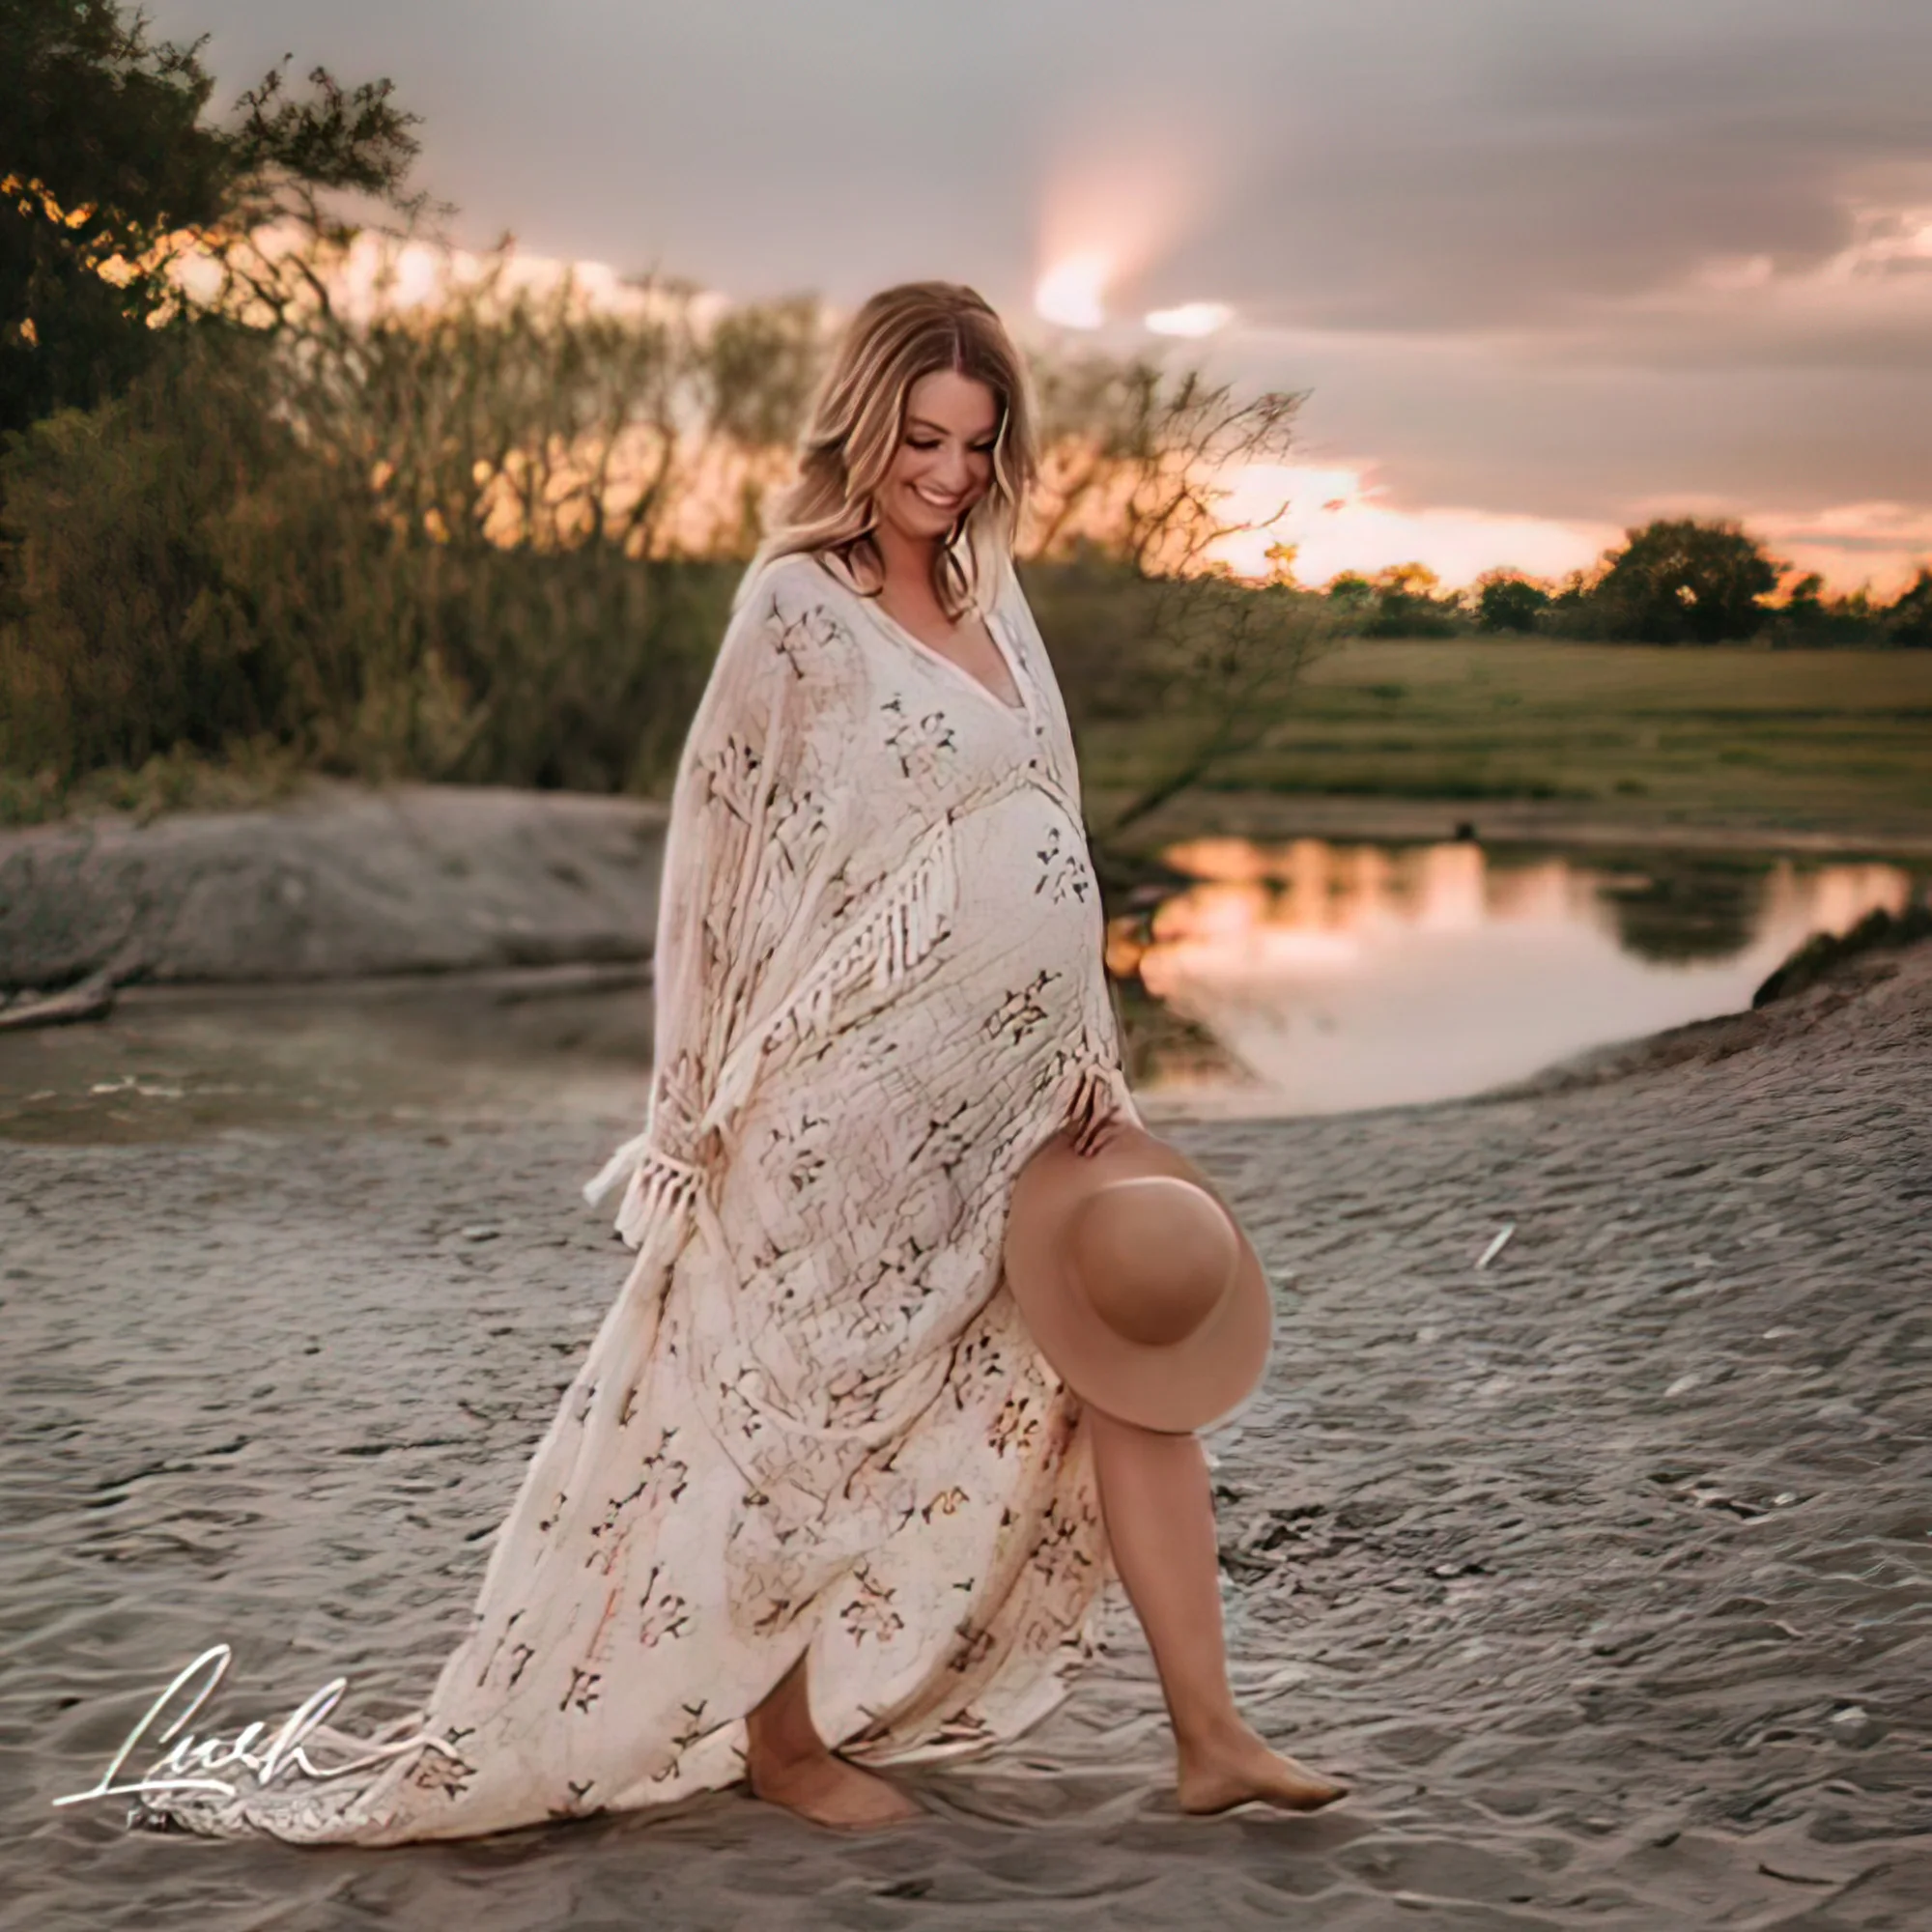 Boho Lace Photo Shoot Pregnant Robe Maternity Dresses with Tassels Evening Party Costume for Women Photography Accessories enlarge